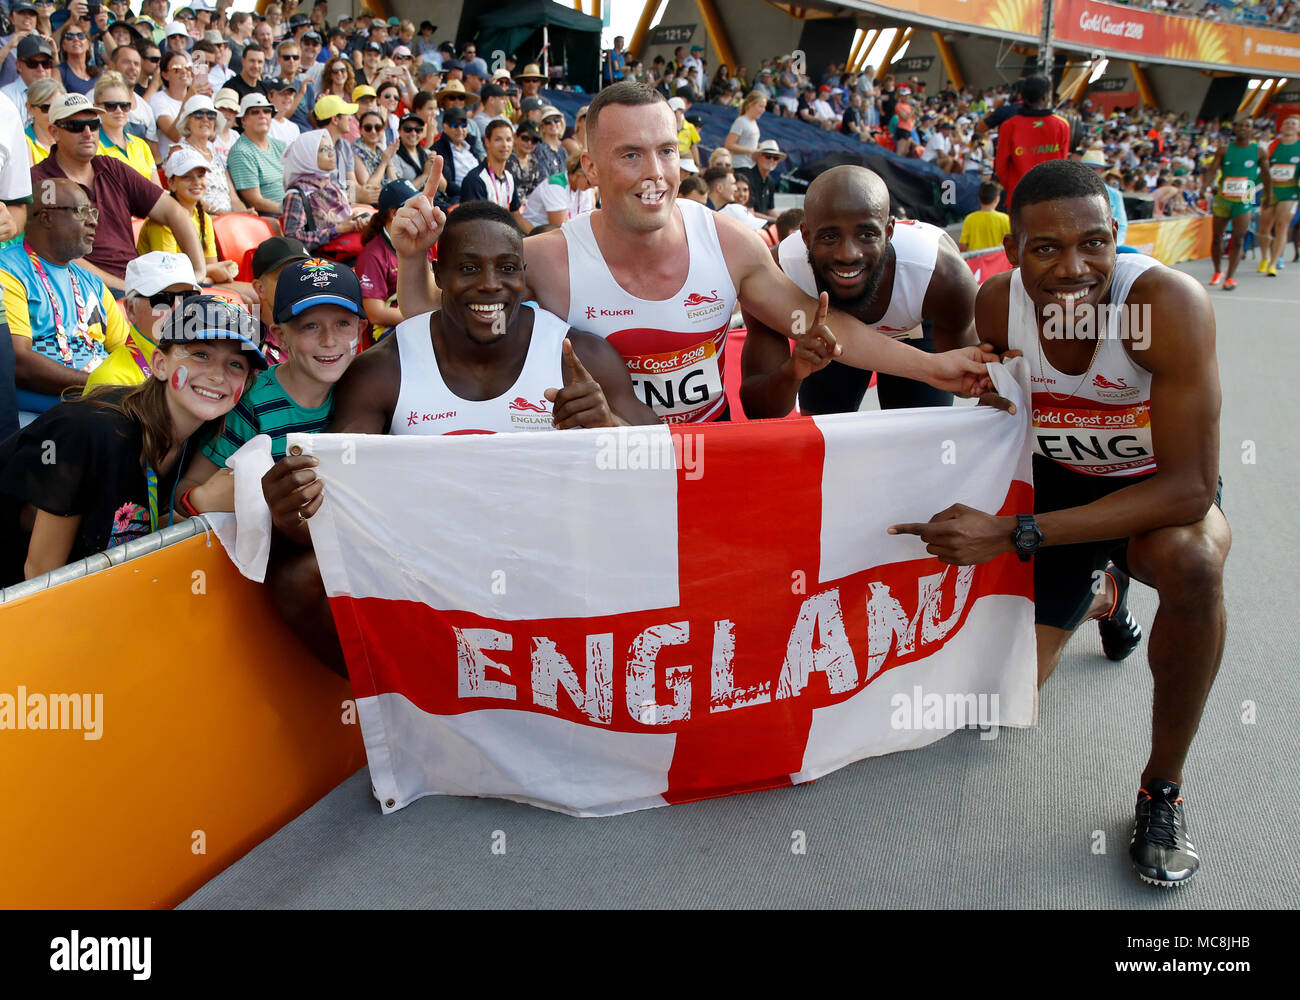 England's (left-right) Harry Aikines-Aryeetey, Richard Kilty, Reuben Arthur and Zharnel Hughes celebrate taking gold in the Men's 4x100m Final at the Carrara Stadium during day ten of the 2018 Commonwealth Games in the Gold Coast, Australia. Stock Photo